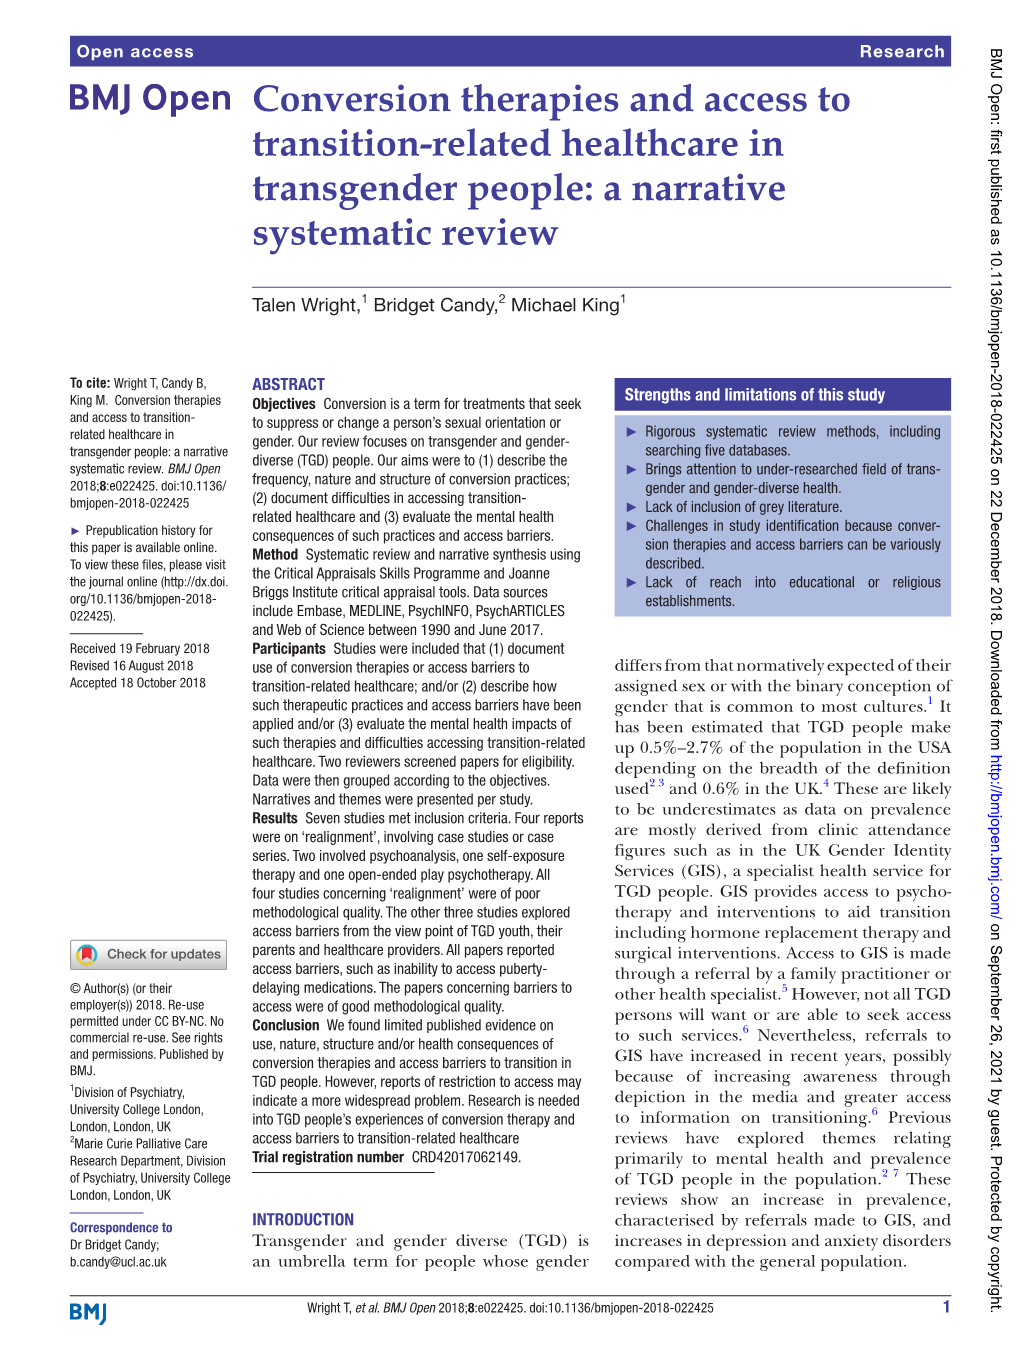 Conversion Therapies and Access to Transition-Related Healthcare in Transgender People: a Narrative Systematic Review